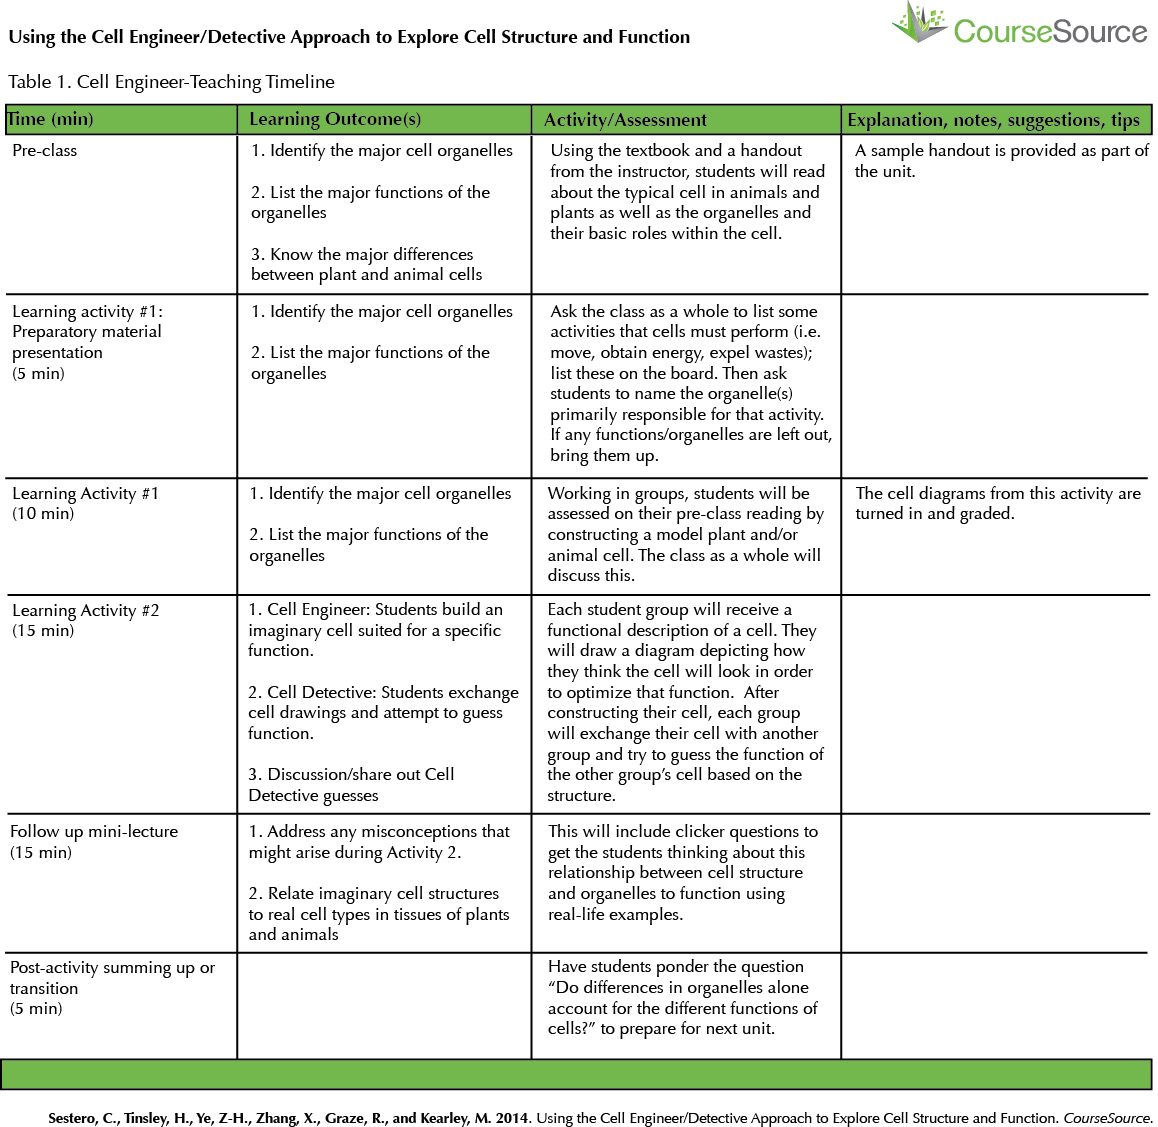 Table 1. Cell Engineer-Teaching Timeline